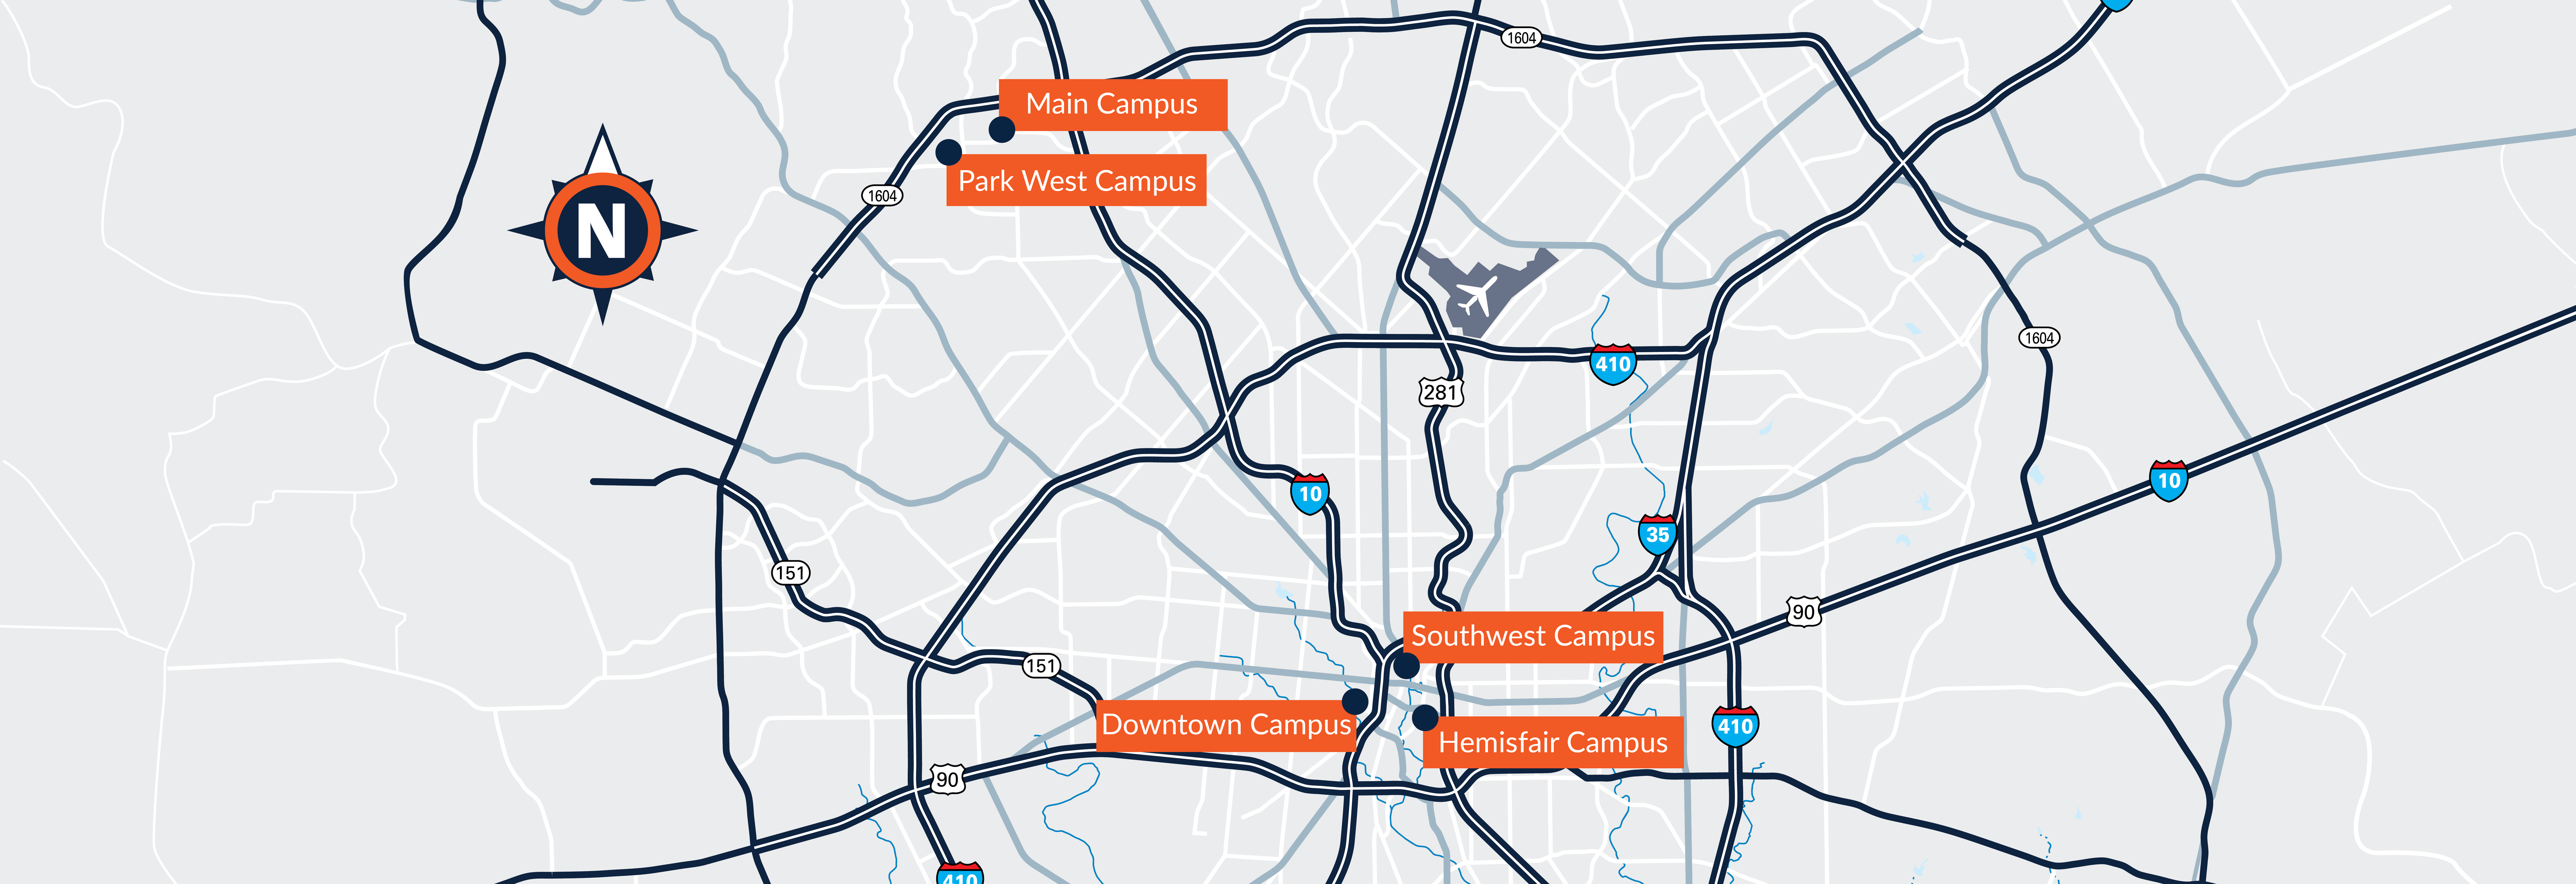 campus-locations-2022.png